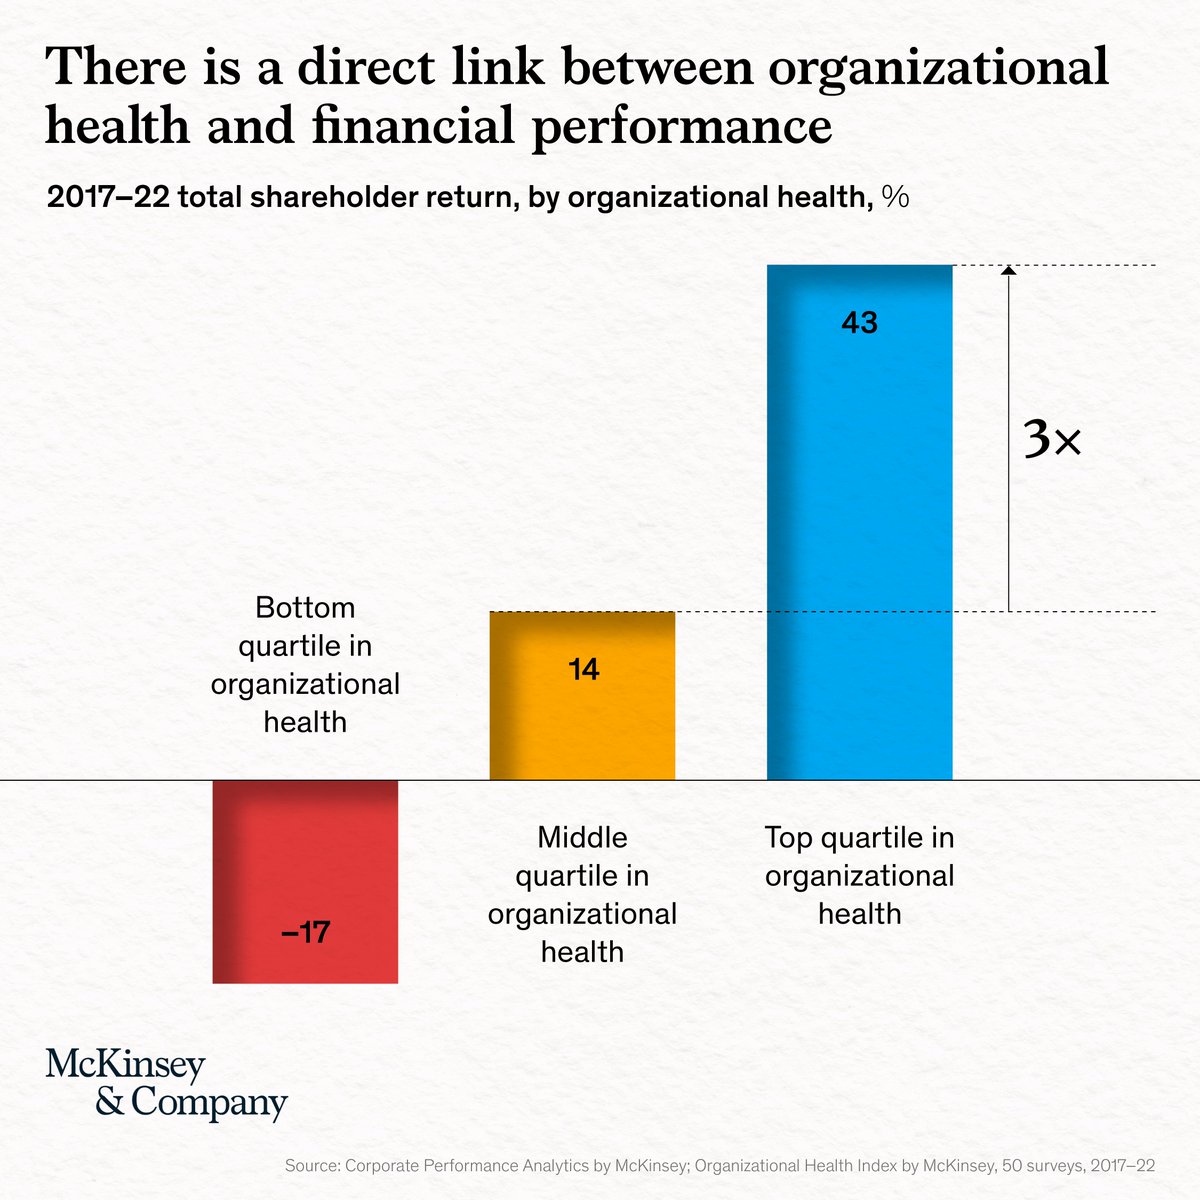 Organizational health is more than just #culture or employee #engagement—it’s a company’s ability to get everyone aligned on a common vision.

Learn more in The State of Organizations report: mck.co/StateOfOrgs 

#StateOfOrganizations #OrganizationalHealth #Culture